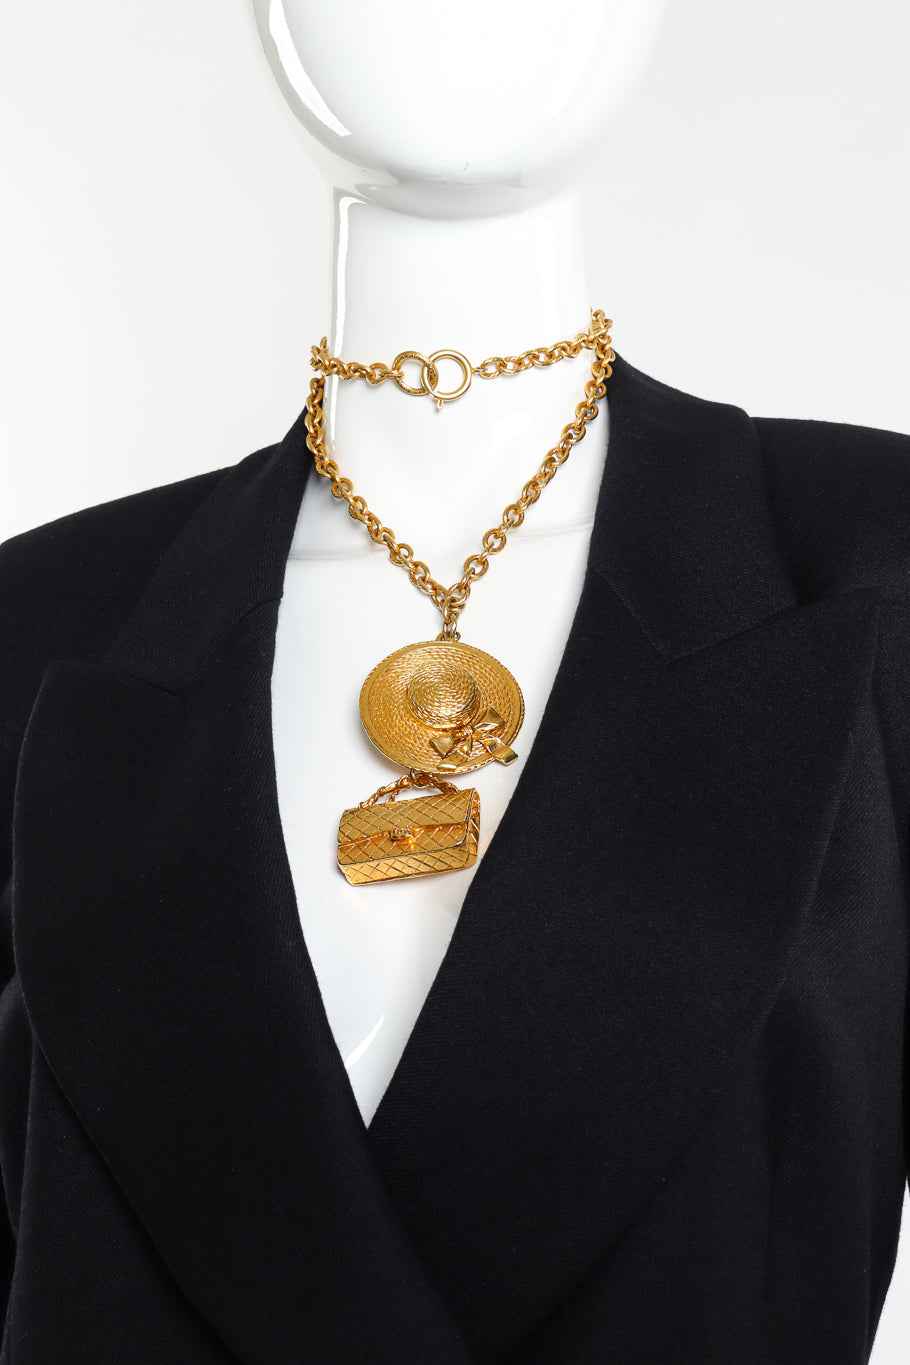 Vintage Chanel Sun Hat and Bag Pendant Necklace looped twice on mannequin @recessla